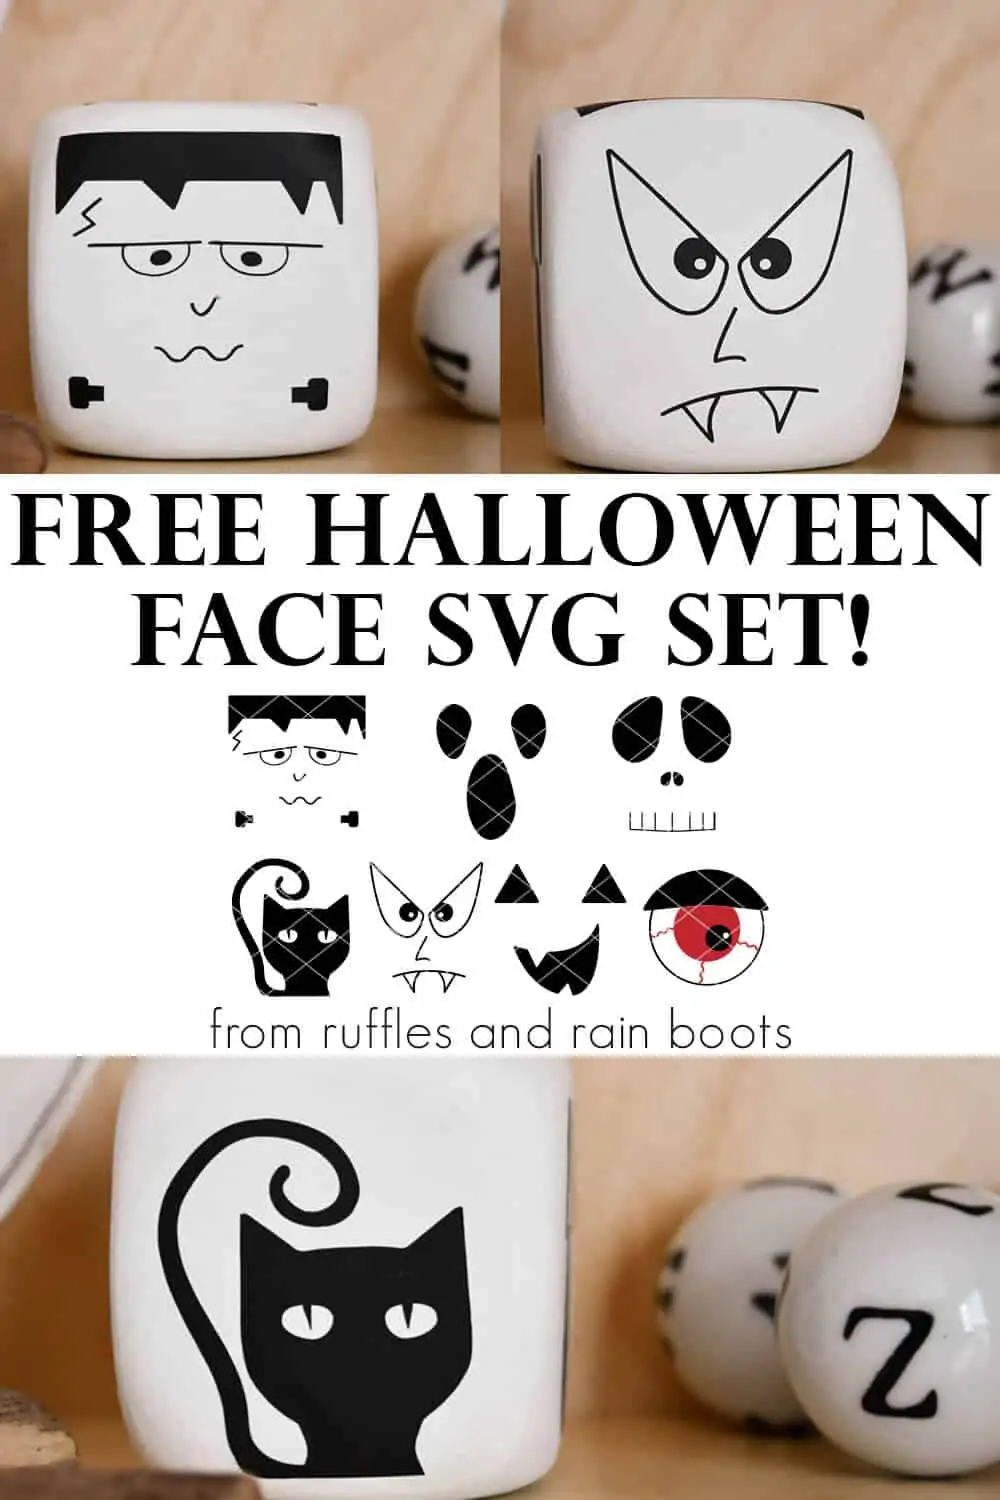 collage of Halloween faces svg offered for free from ruffles and rain boots for Halloween crafts and decor